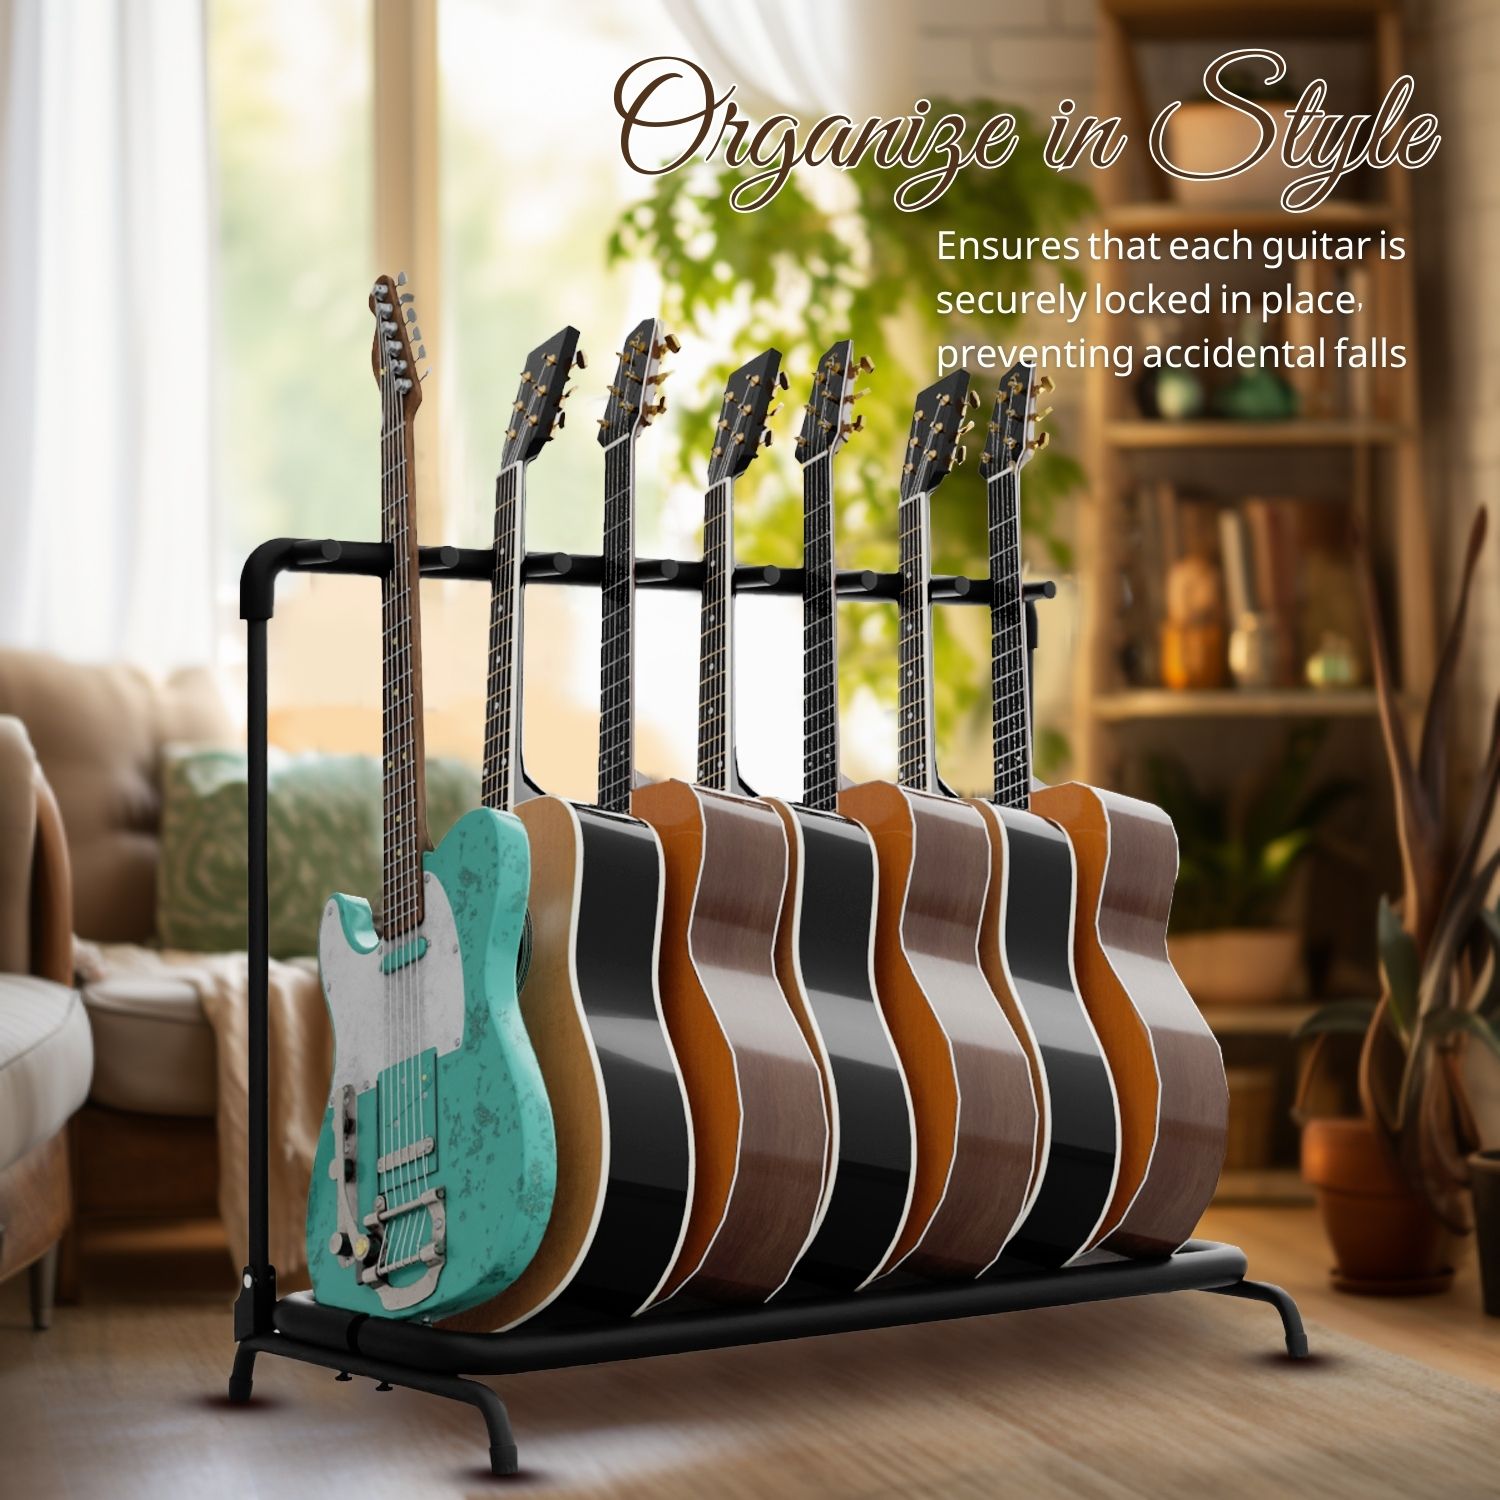 Easy Assembly and Pack Â– No additional tool is needed for setting up the rack; Can be assembled and dissembled in minutes and foldable/collapsible design for easier transport and storage; Highly portable and compact, perfect for musicians traveling without taking up too much space